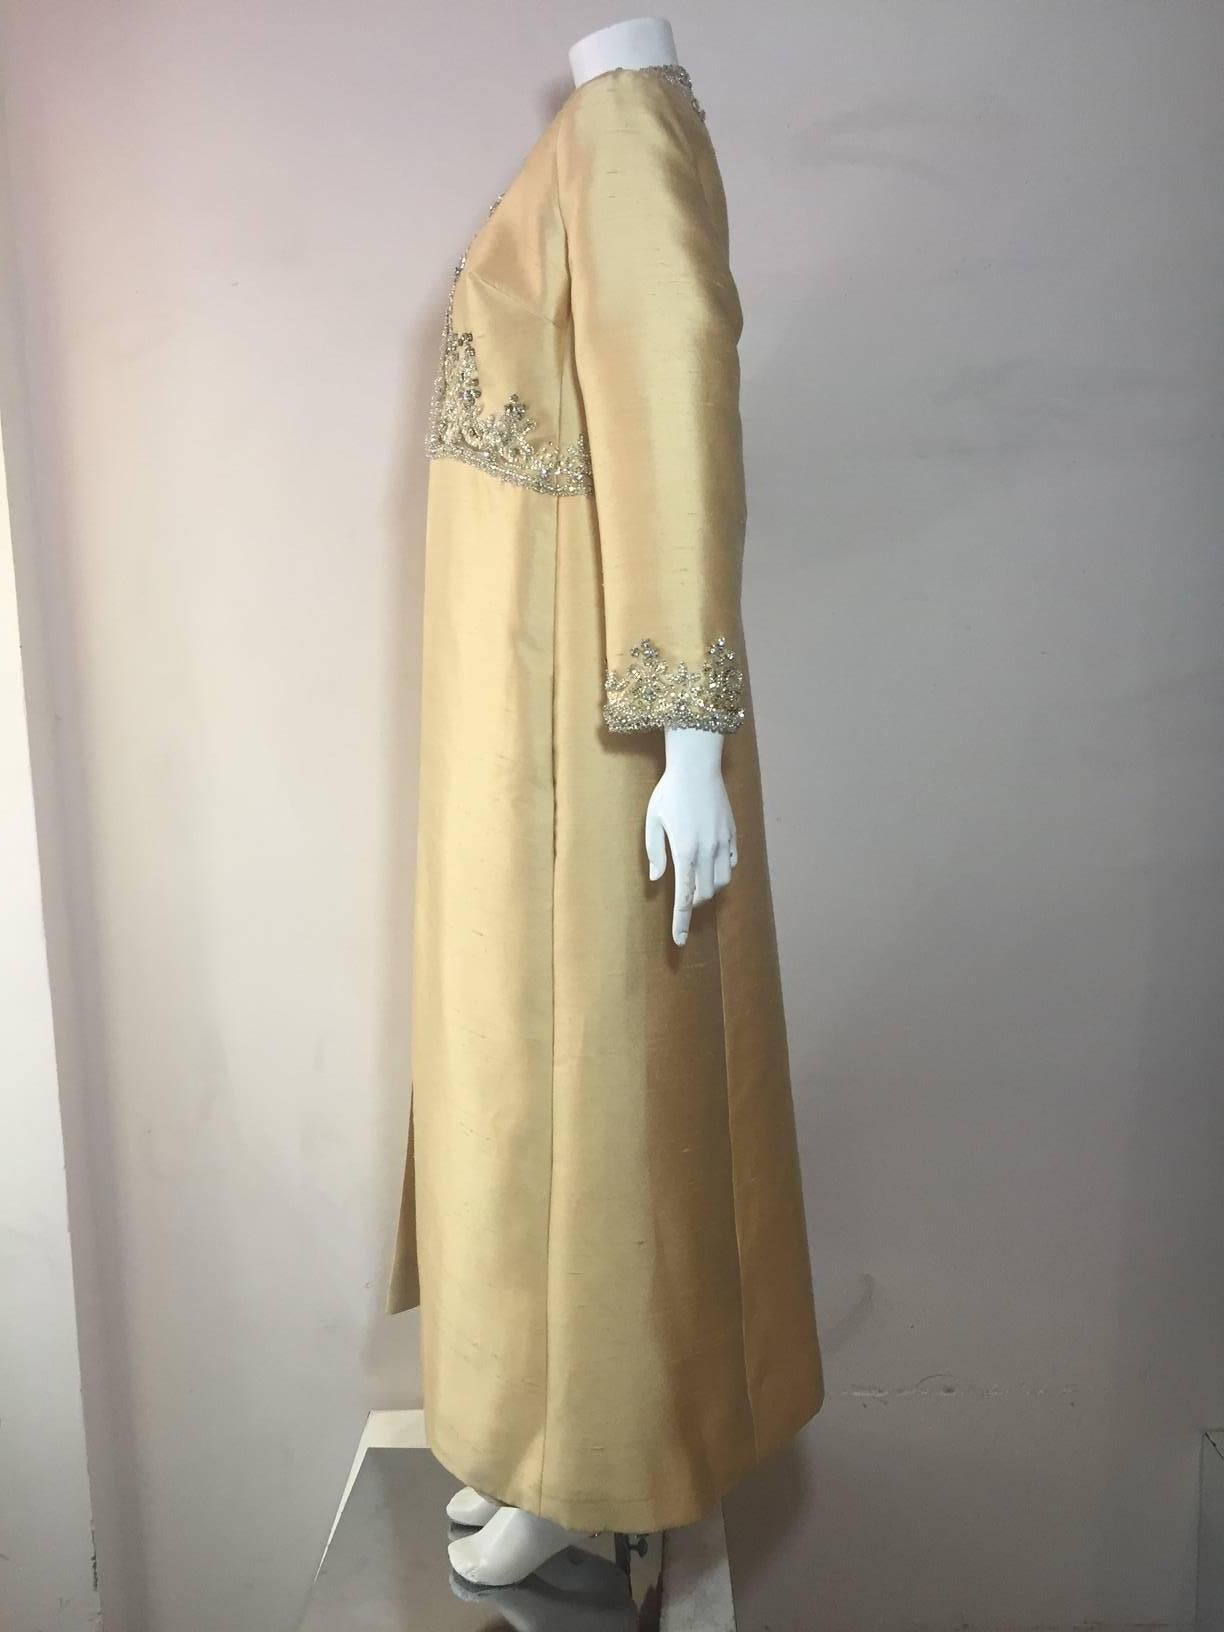 A heavenly 1960s champagne shantung 2-piece custom made ensemble:  Gown is Empire waist and sleeveless with heavily encrusted sequin, rhinestone and faux pearl embellishments running entire length of front.  Coat is constructed to fit over gown with